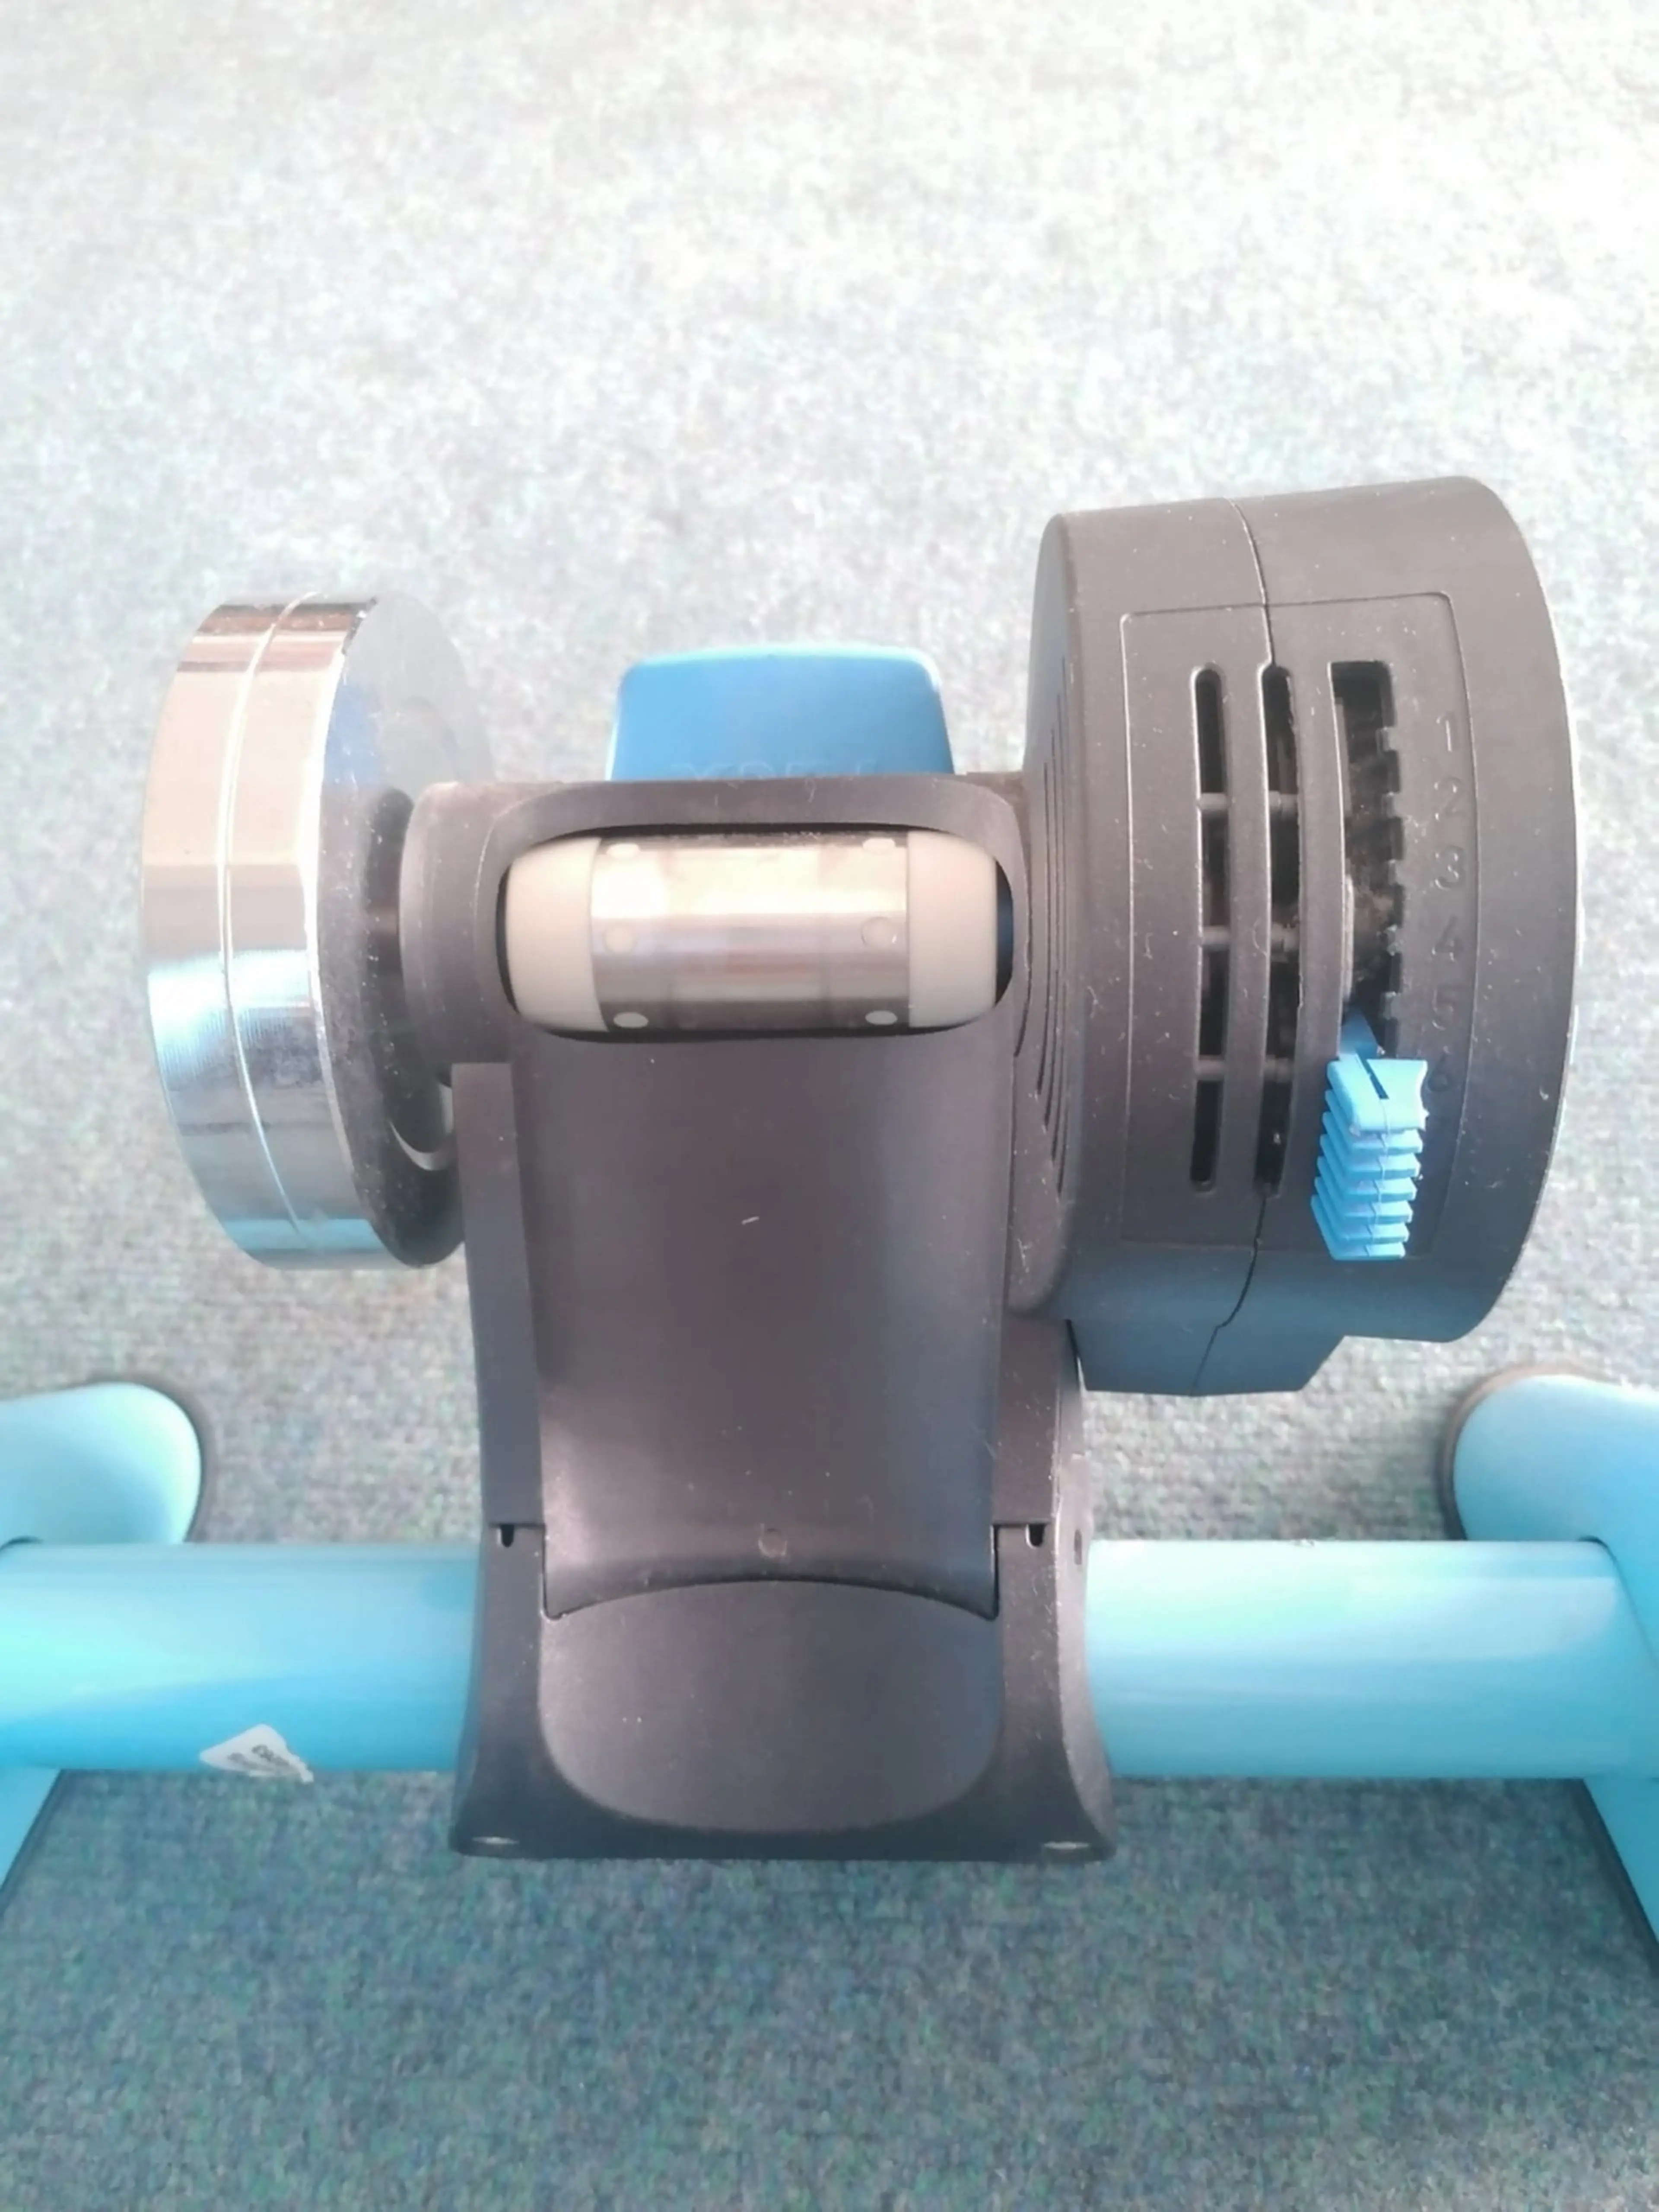 9. Home Trainer Tacx